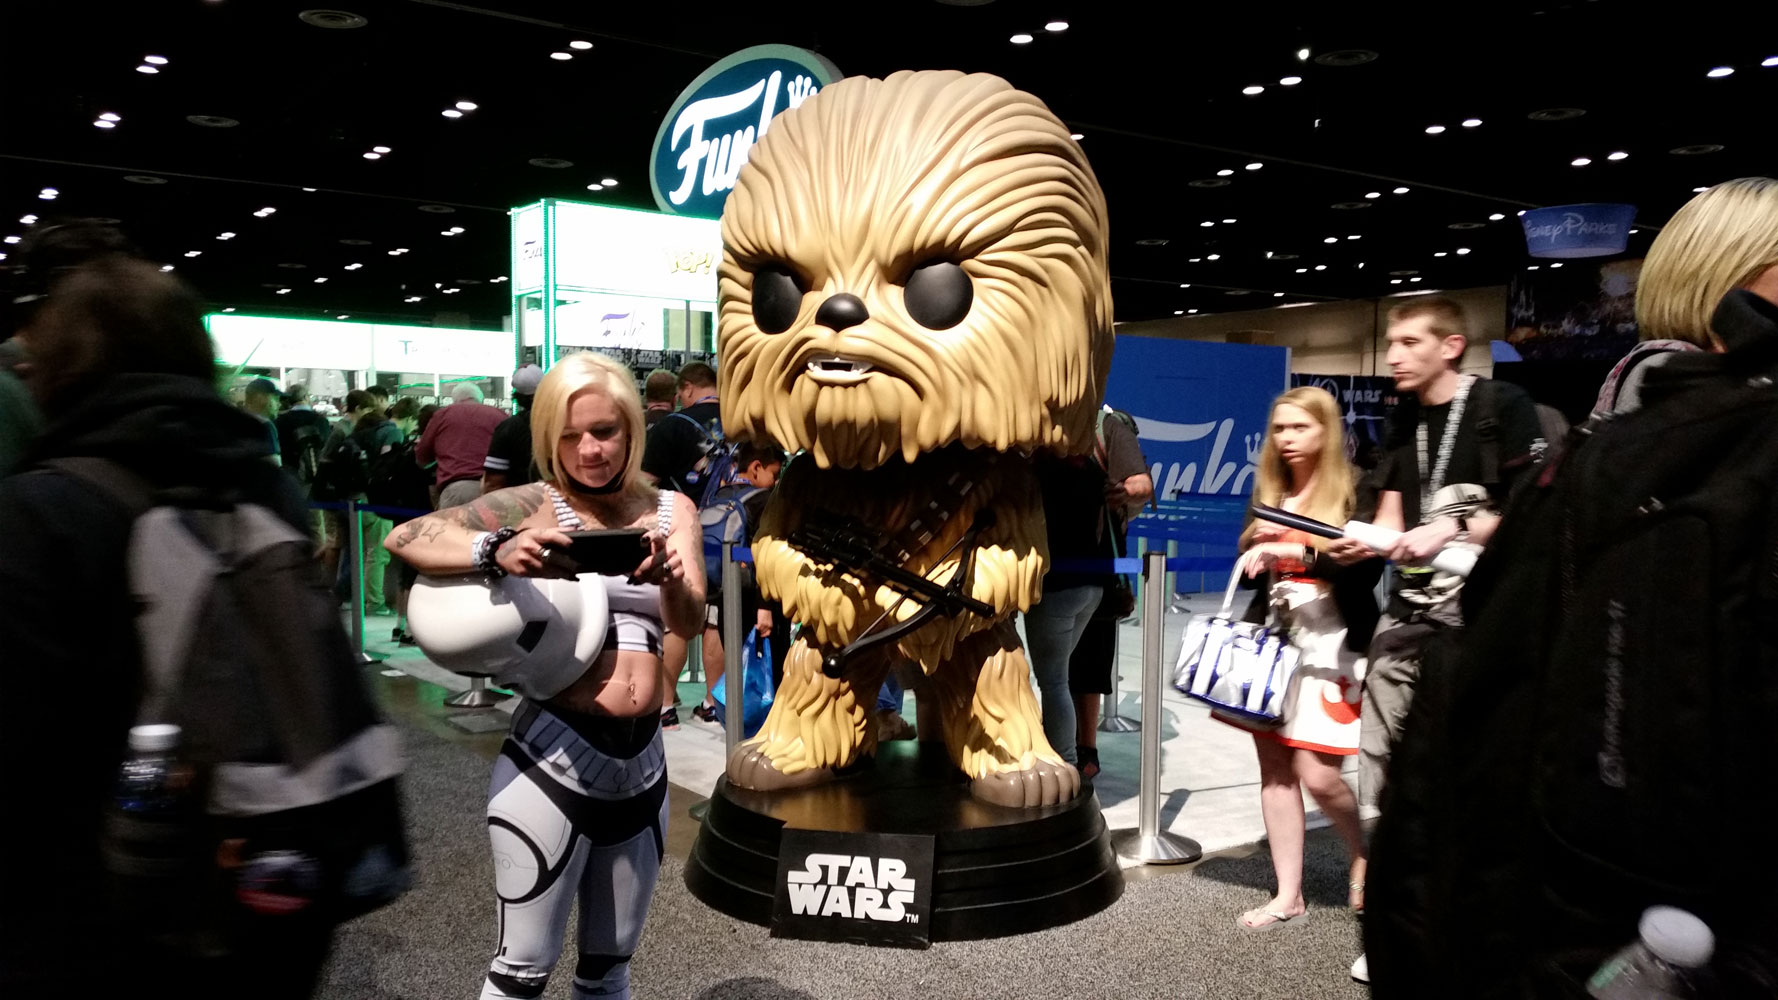 Cute Stormtrooper Girl with Giant Chewie Funko Pop